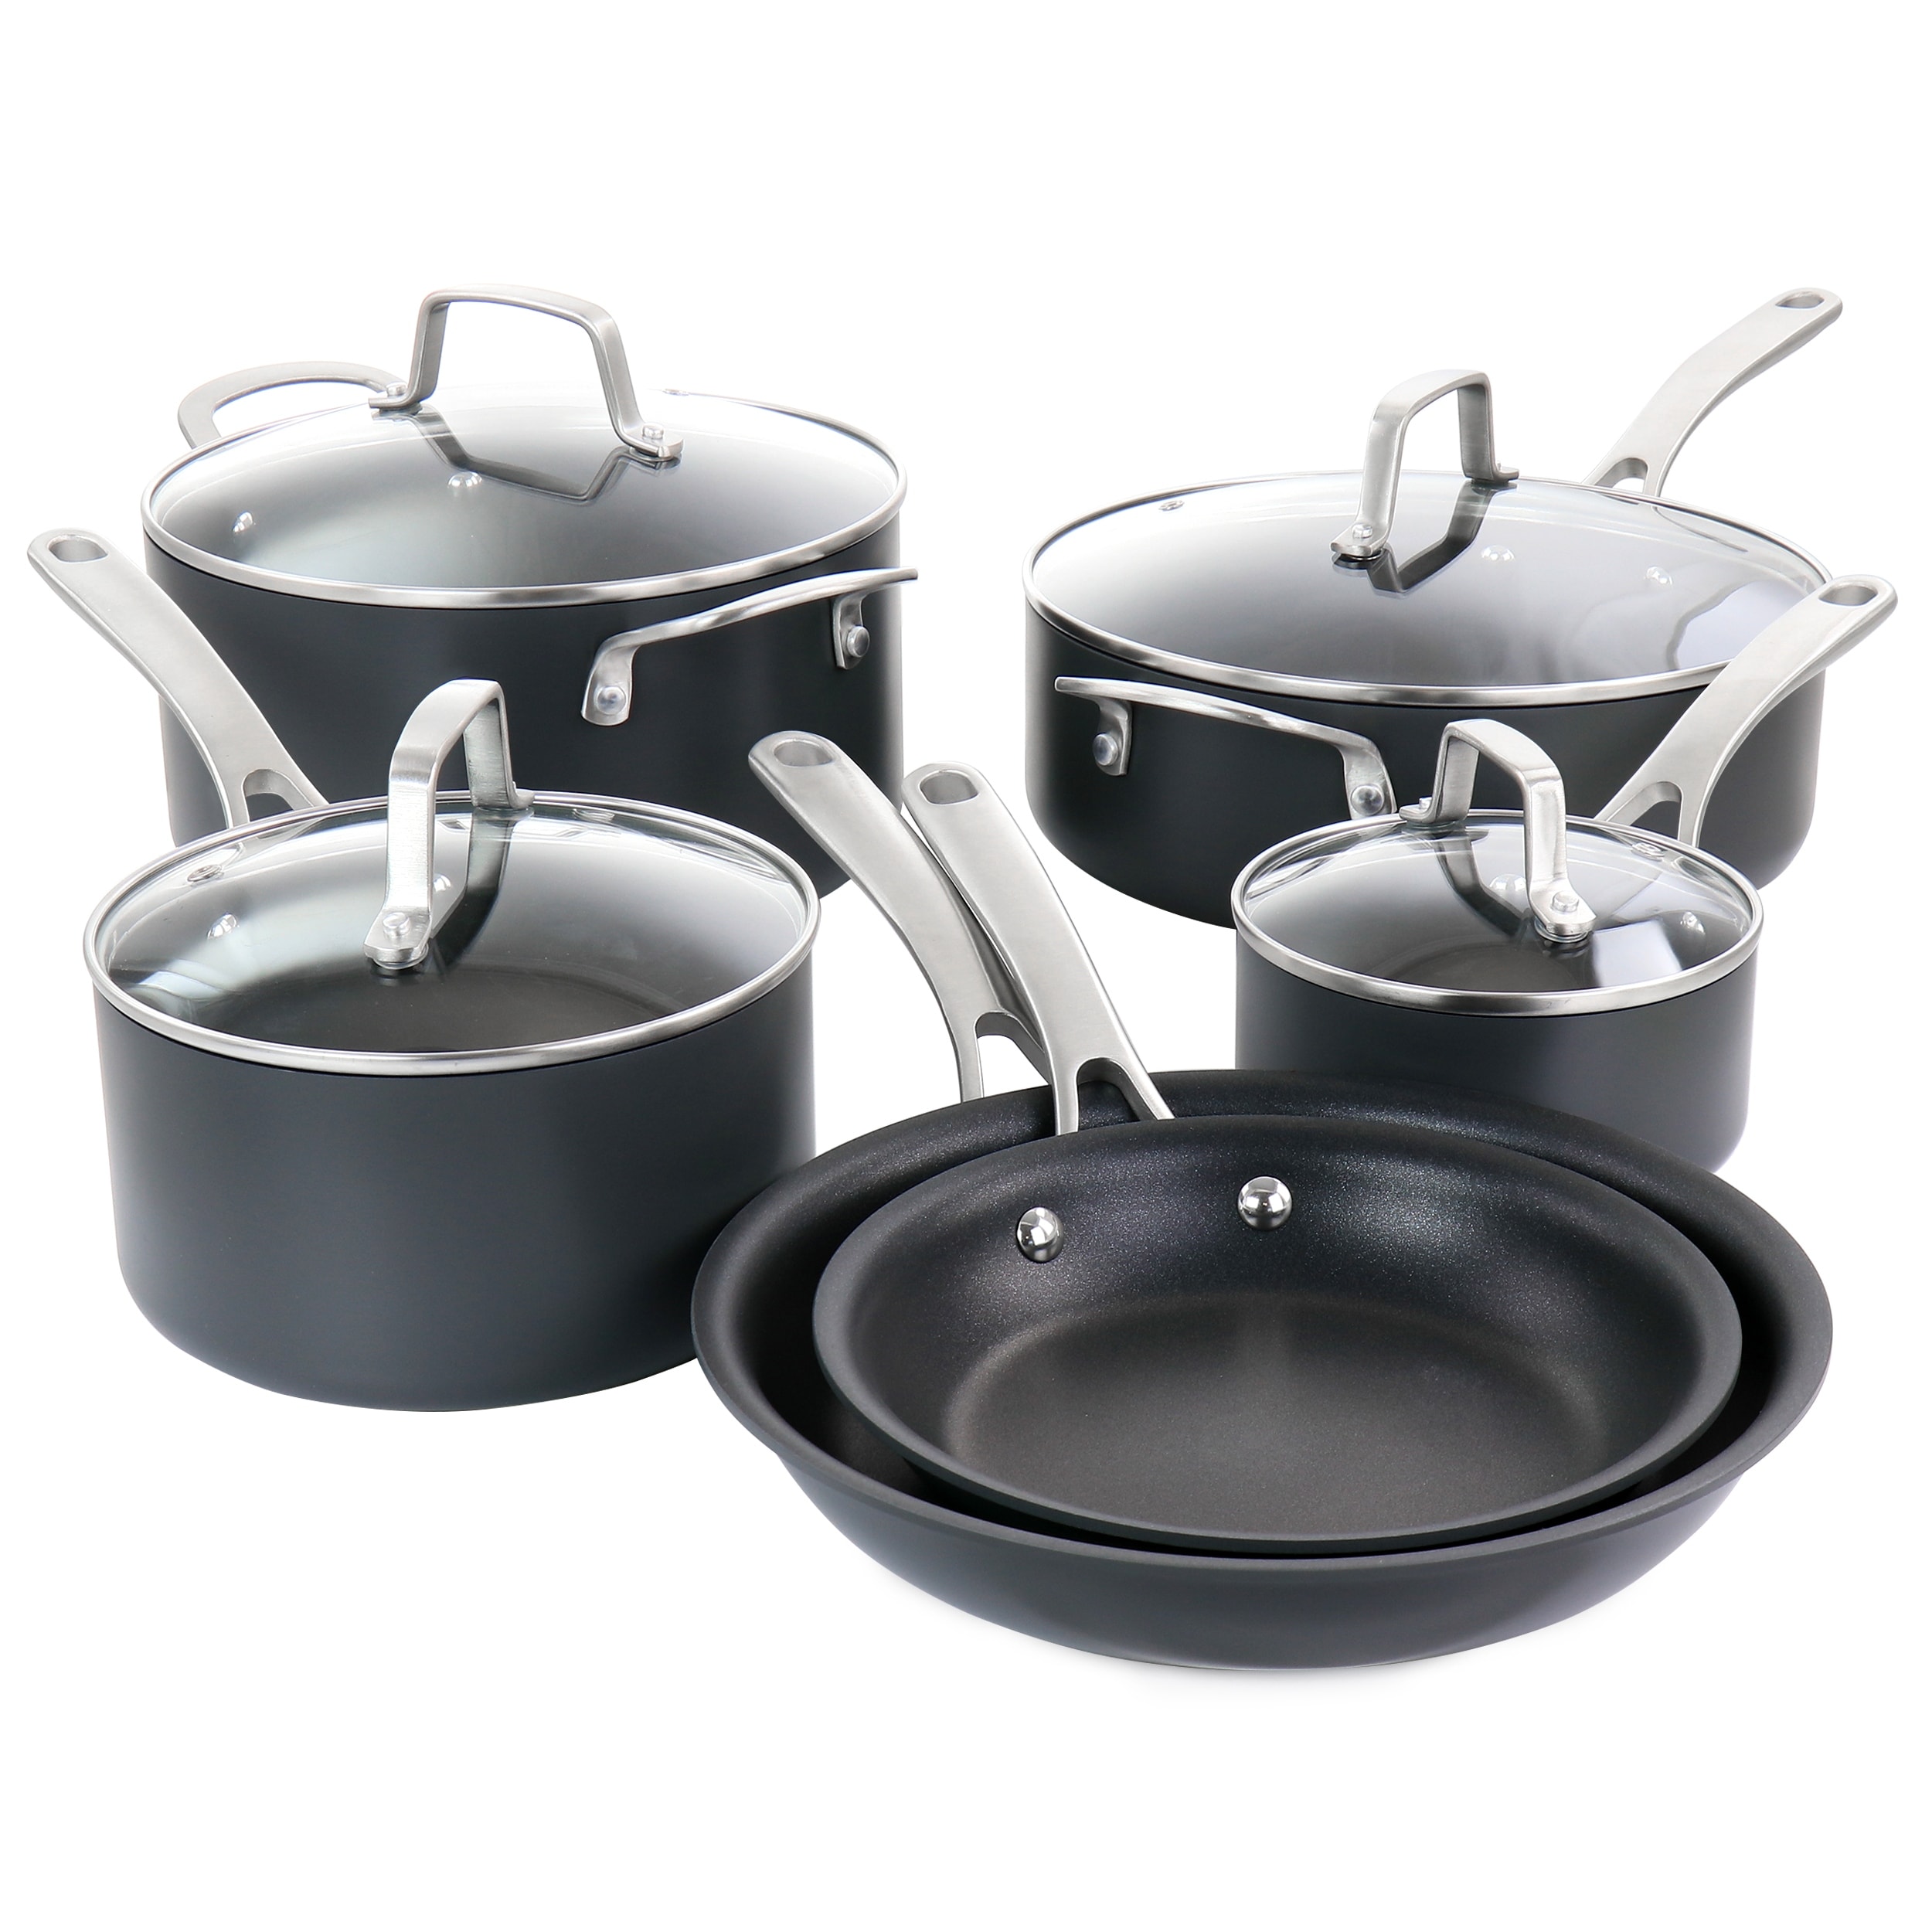 https://ak1.ostkcdn.com/images/products/is/images/direct/5b1f8618b8a34e82b79dca4943b7b831684e4caf/Martha-Stewart-10-Piece-Aluminum-Cookware-Set-in-Matte-Black.jpg